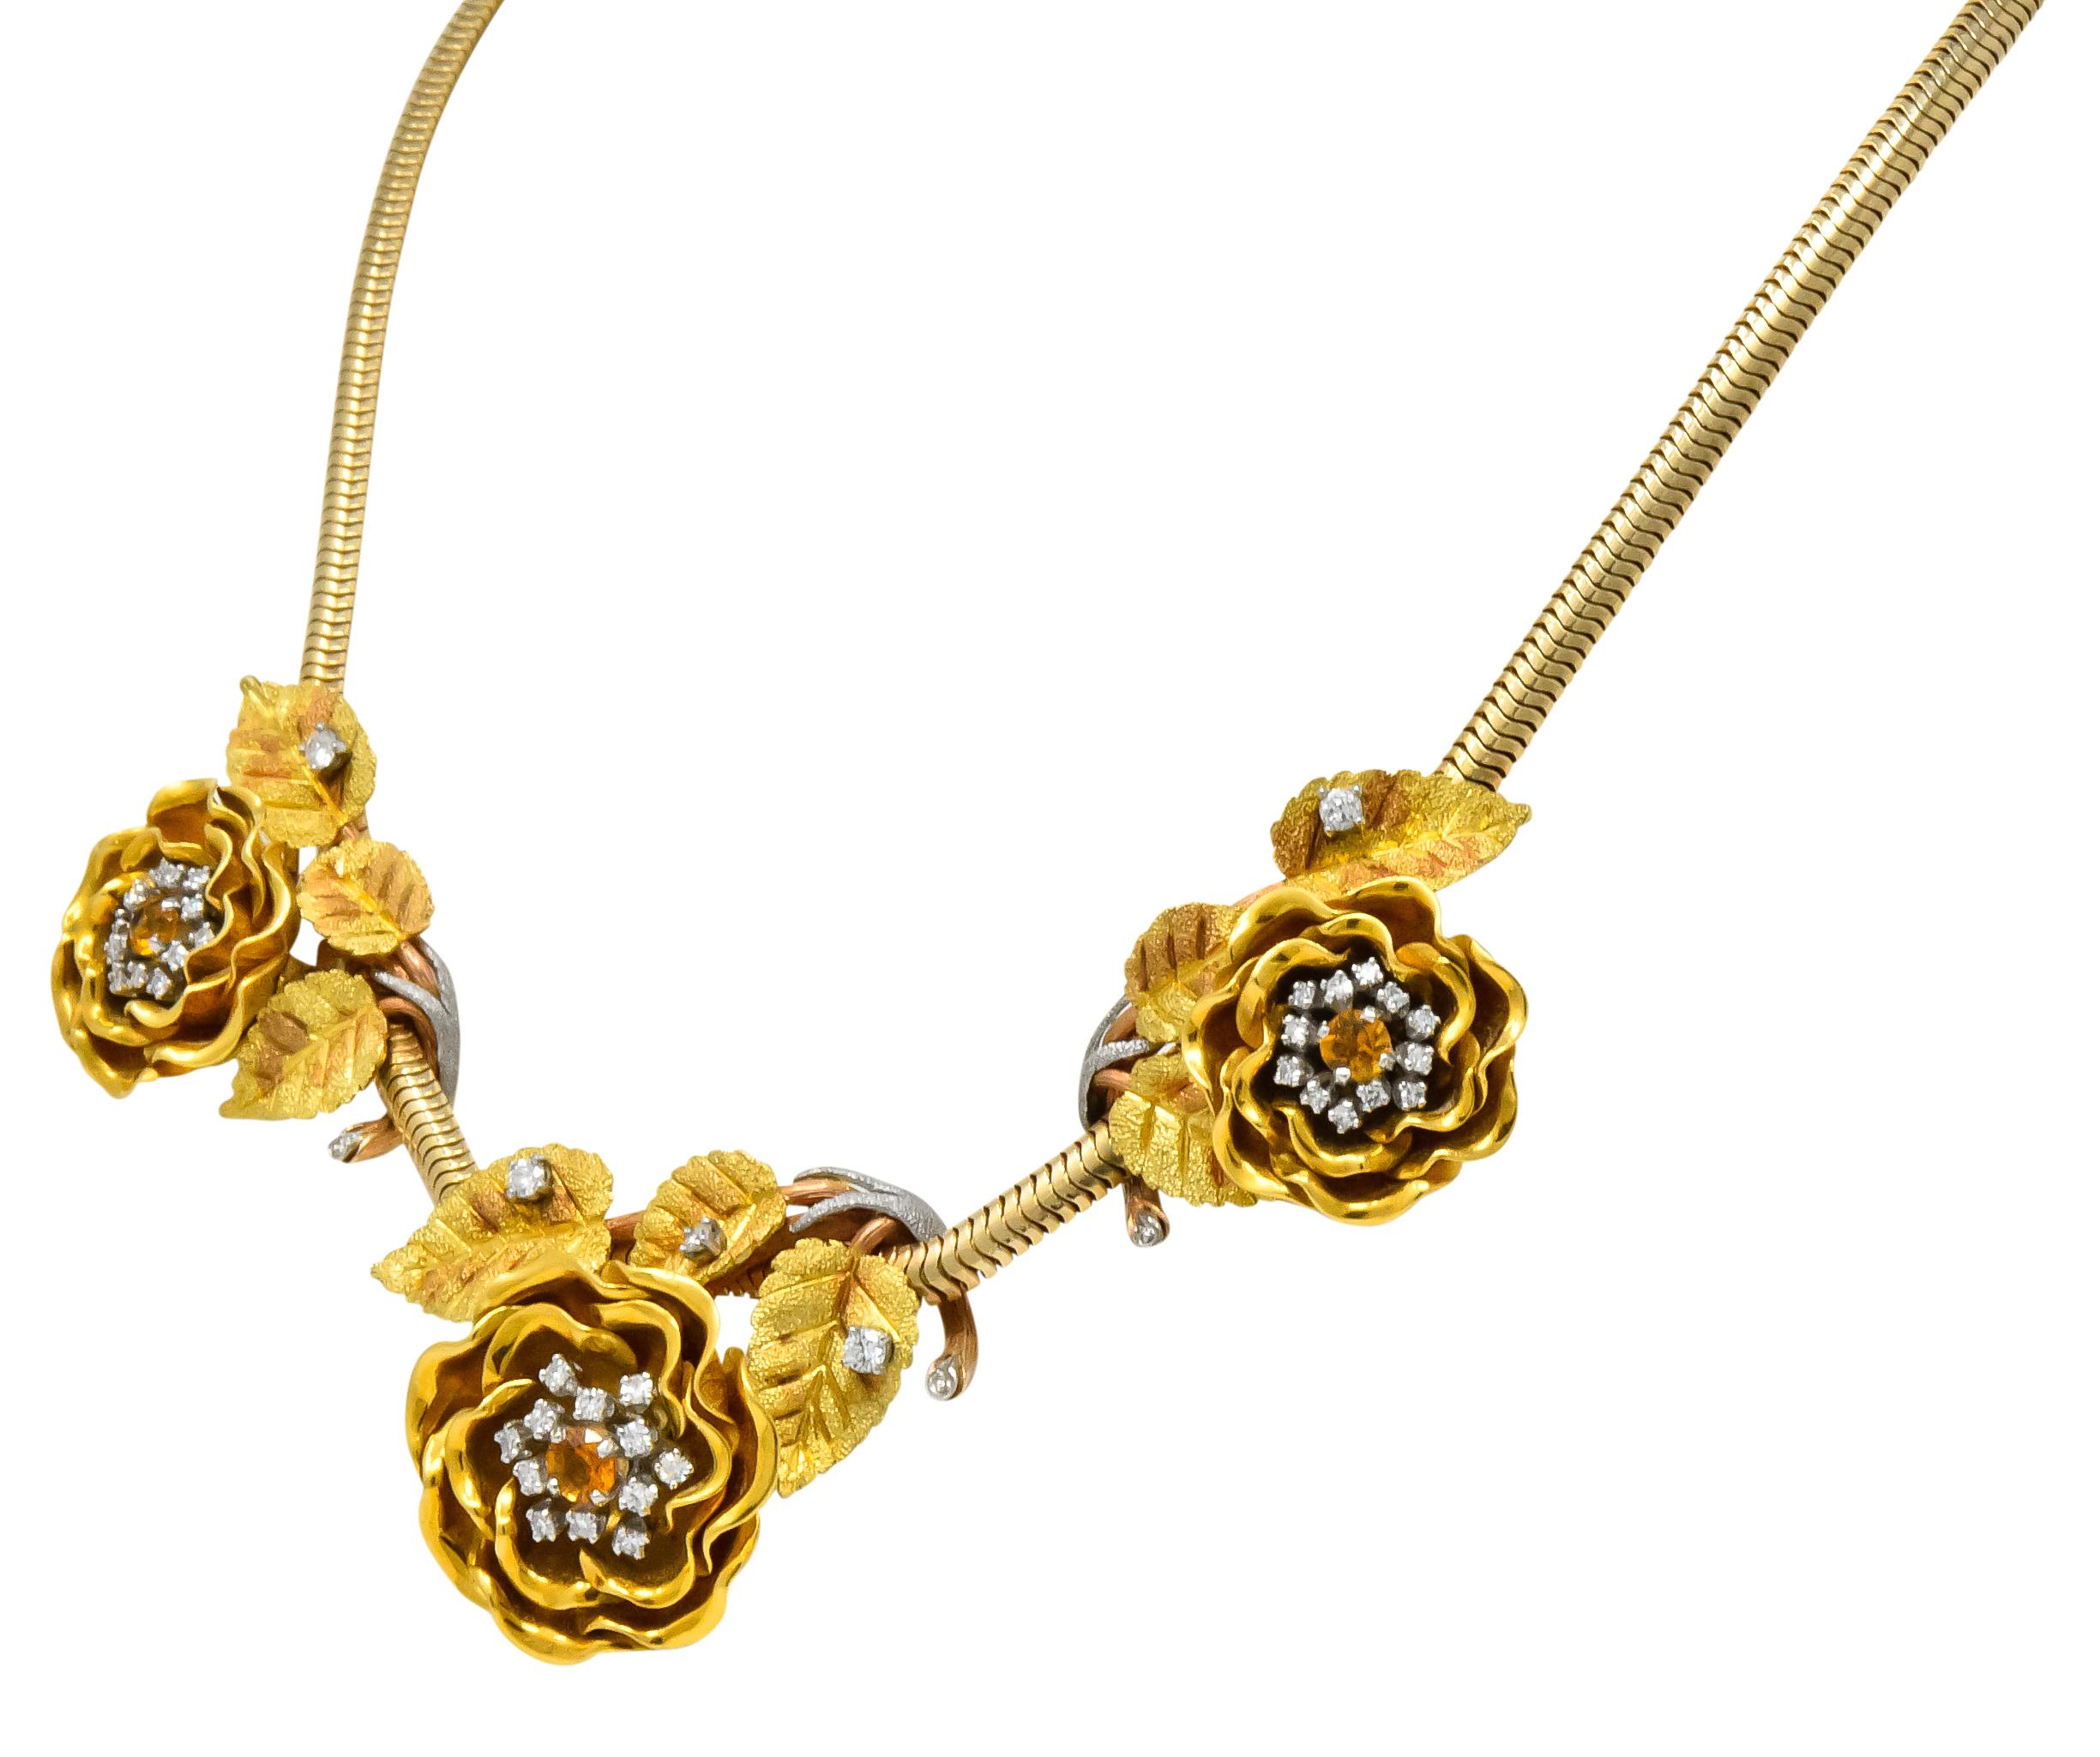 Centering three highly rendered gold flowers surrounded by green gold foliage terminating in rose and white gold stems

Each centering a round cut citrine weighing in total 0.55 carat; transparent and bright yellowish-orange in color

Accented